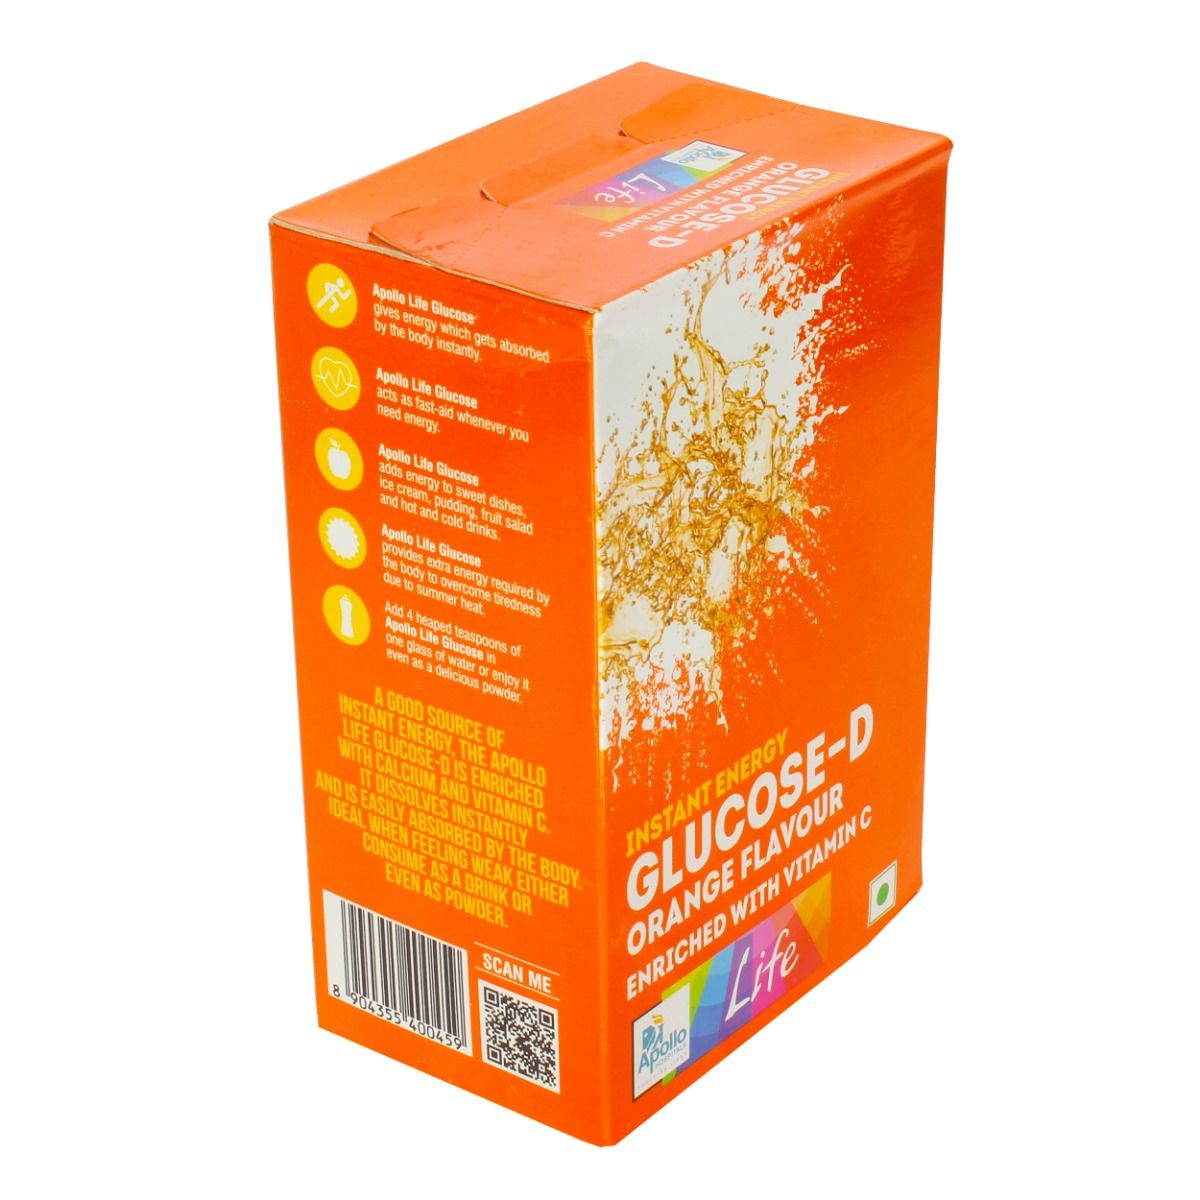 Apollo Life Glucose-D Instant Energy Orange Flavour Drink, 500 gm, Pack of 1 